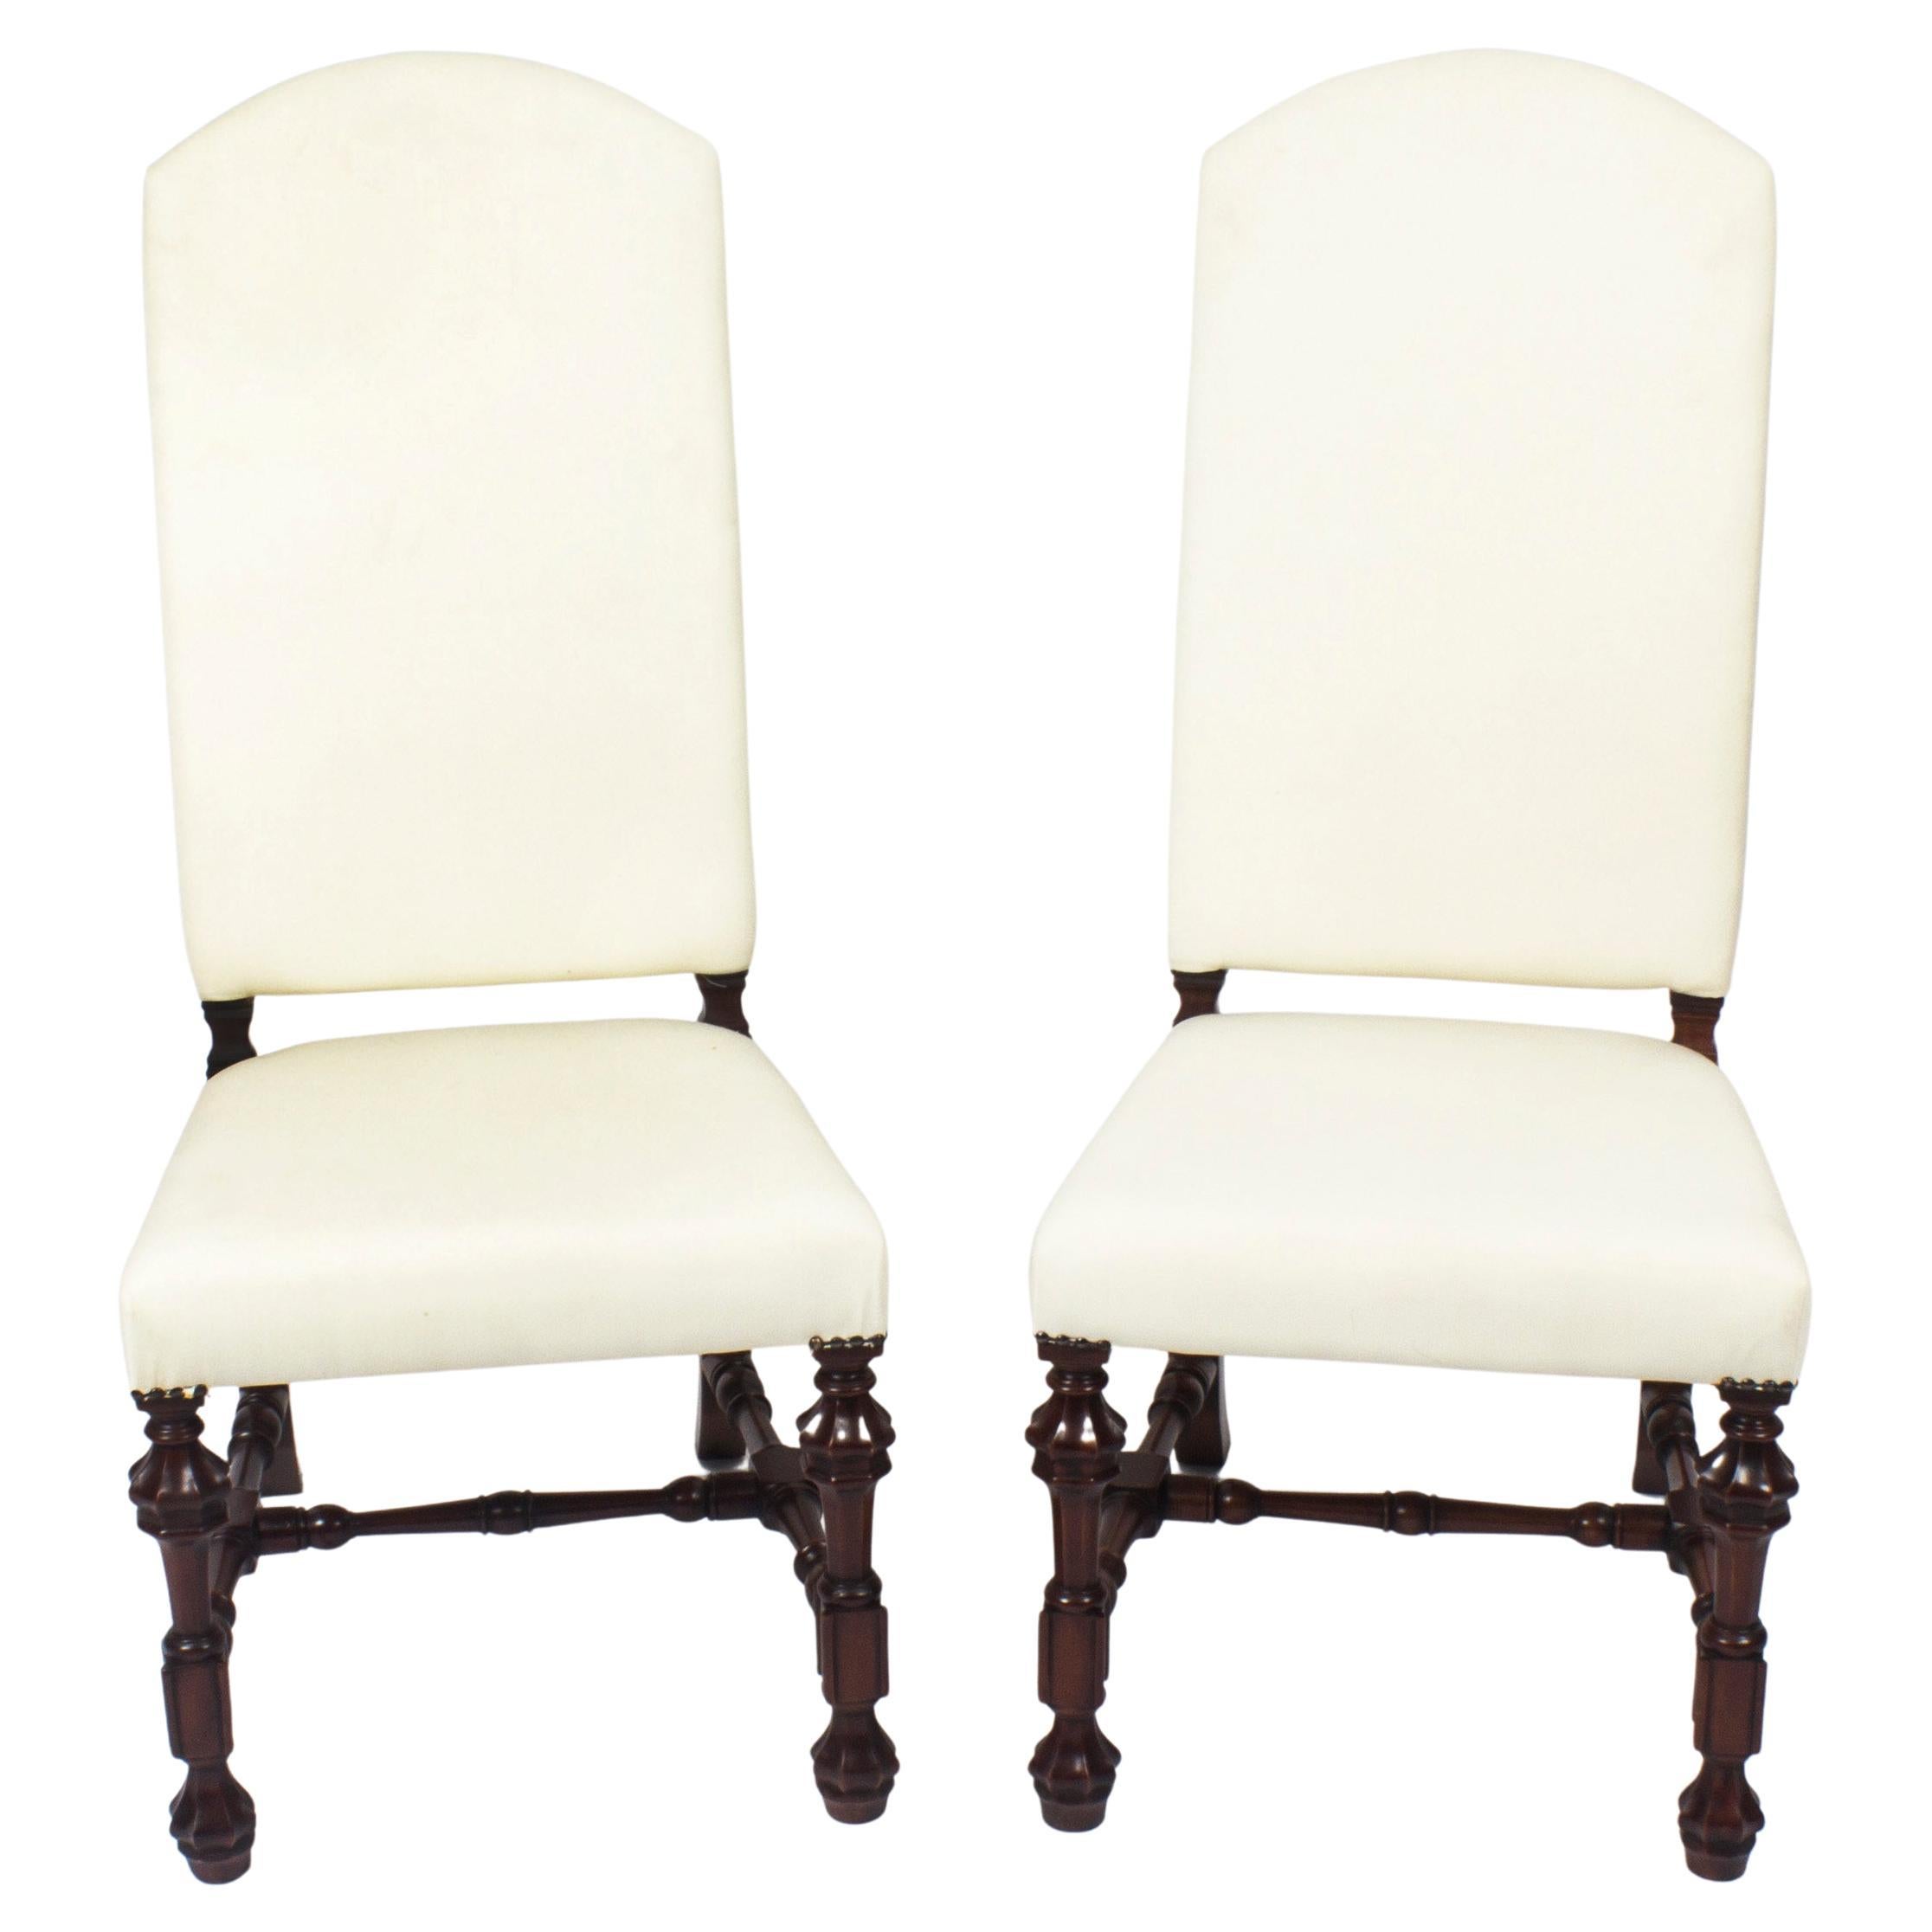 Vintage Pair of Carolean Style Upholstered High Back Dining Chairs, 20th Century For Sale